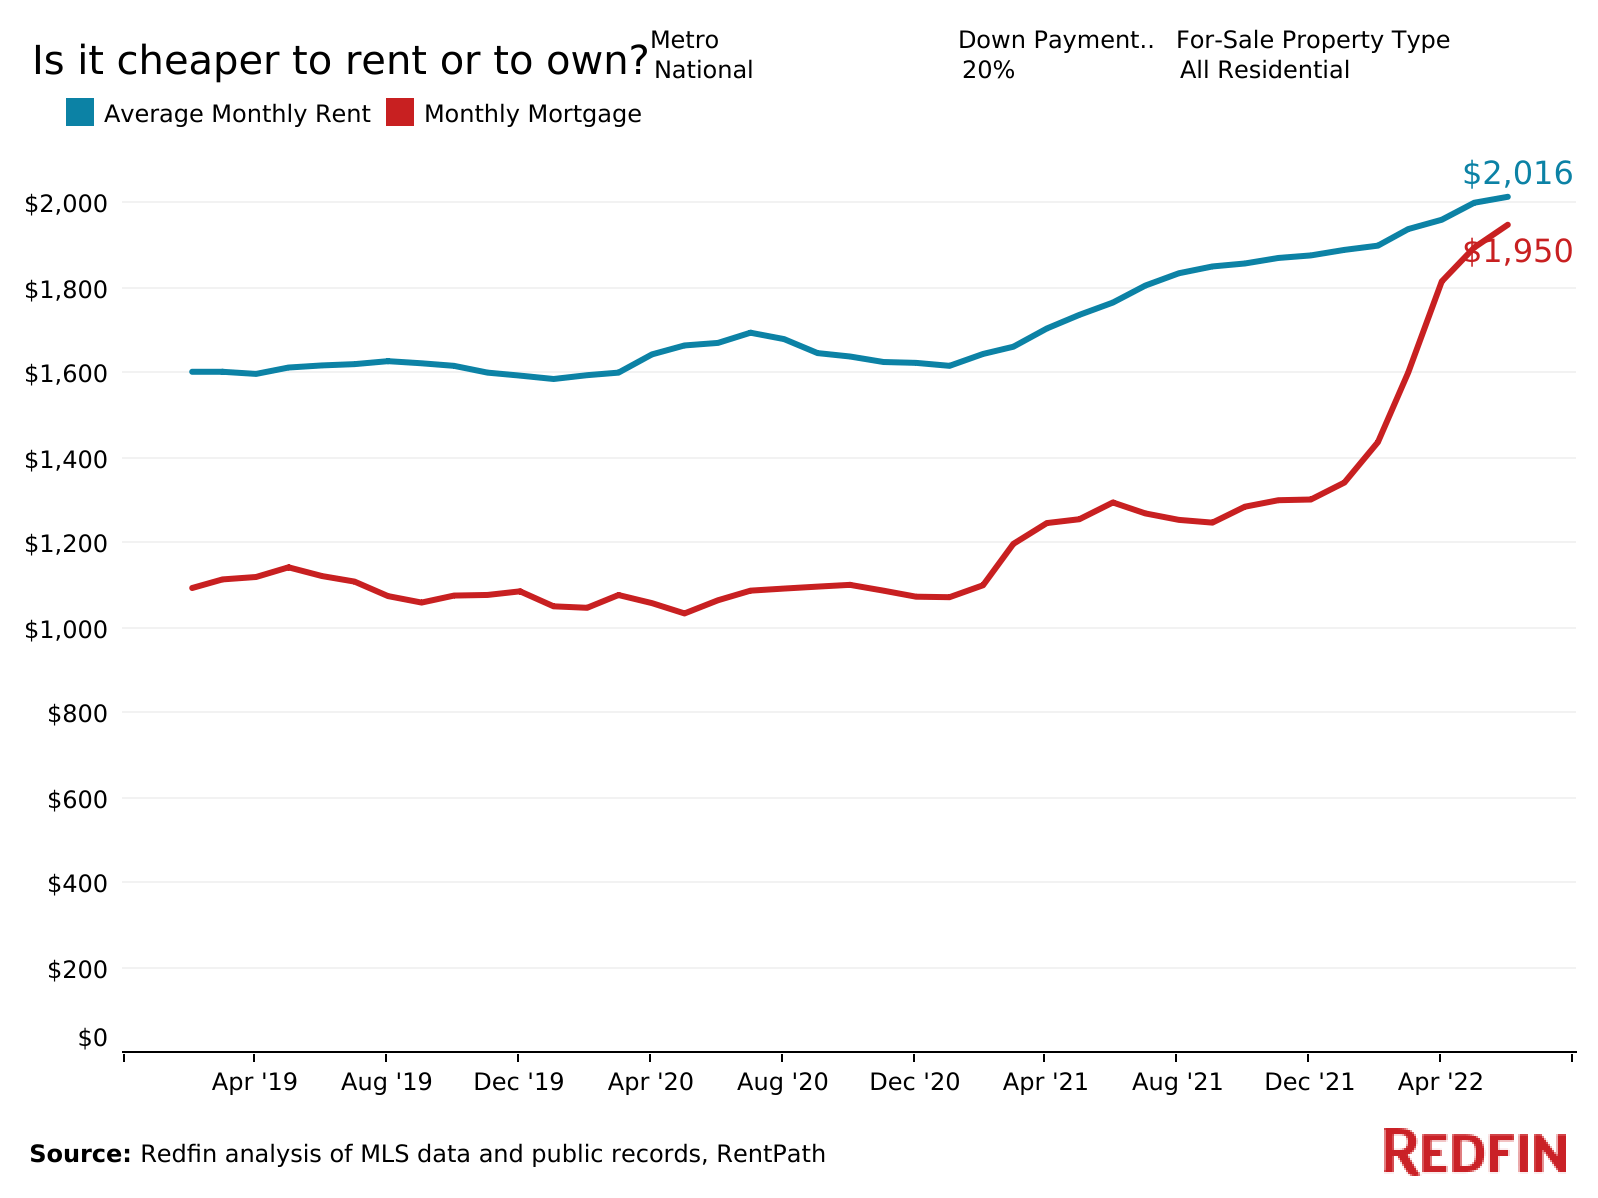 Redfin Graph showing average monthly rent in April 2022 as $2,016 and average monthly mortgage as $1,950, with a 20% down payment